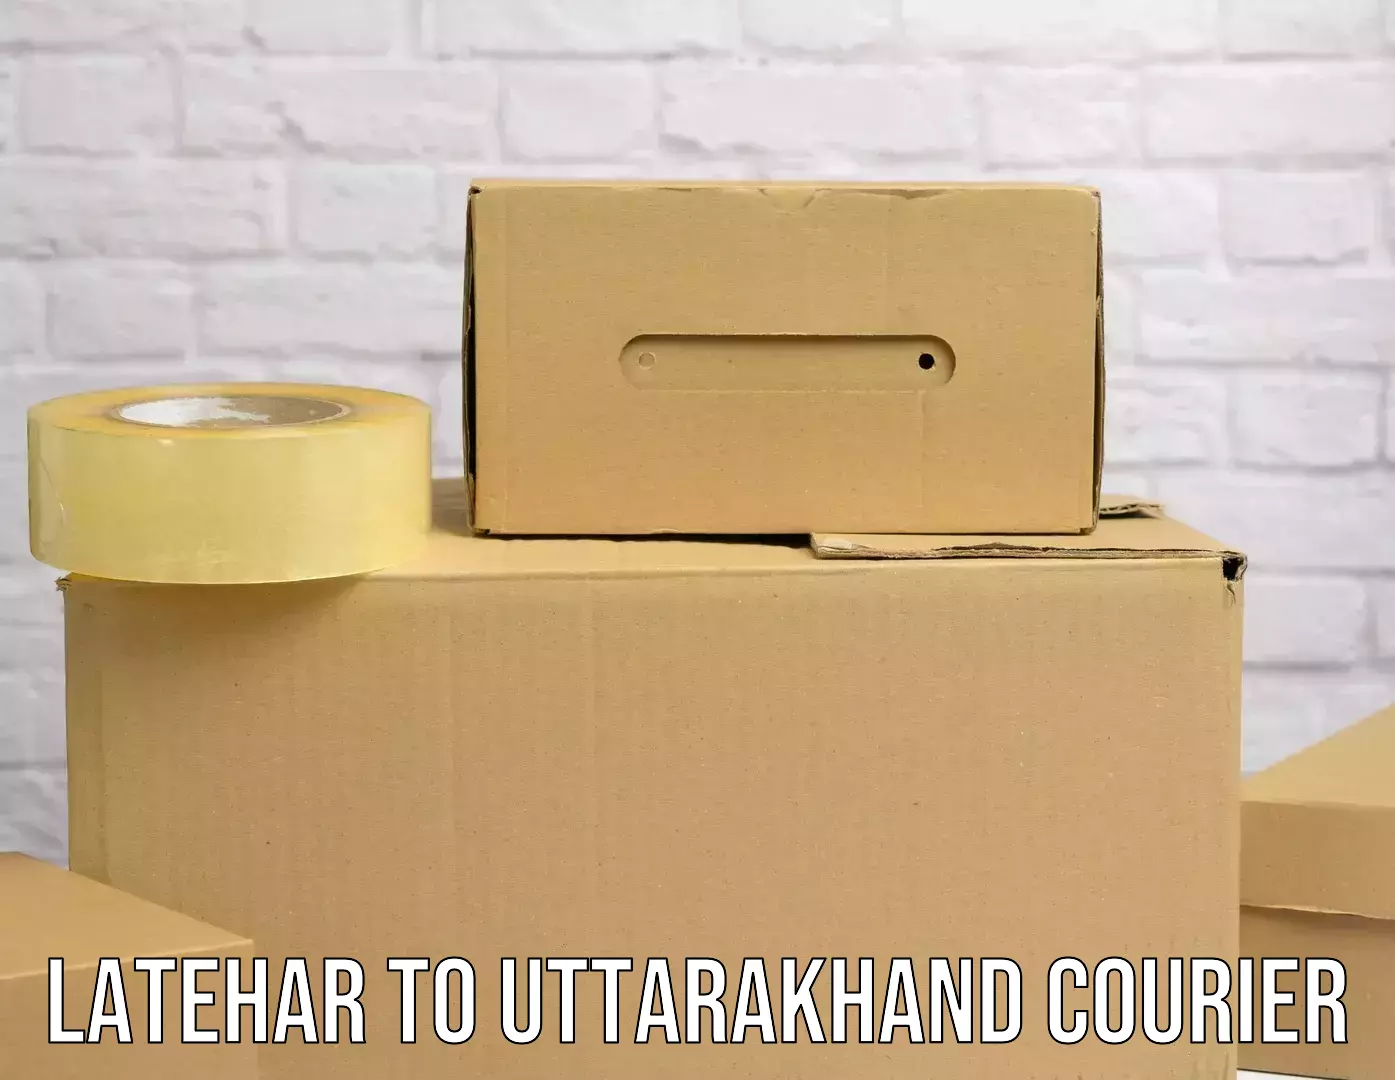 Heavy parcel delivery Latehar to Haridwar